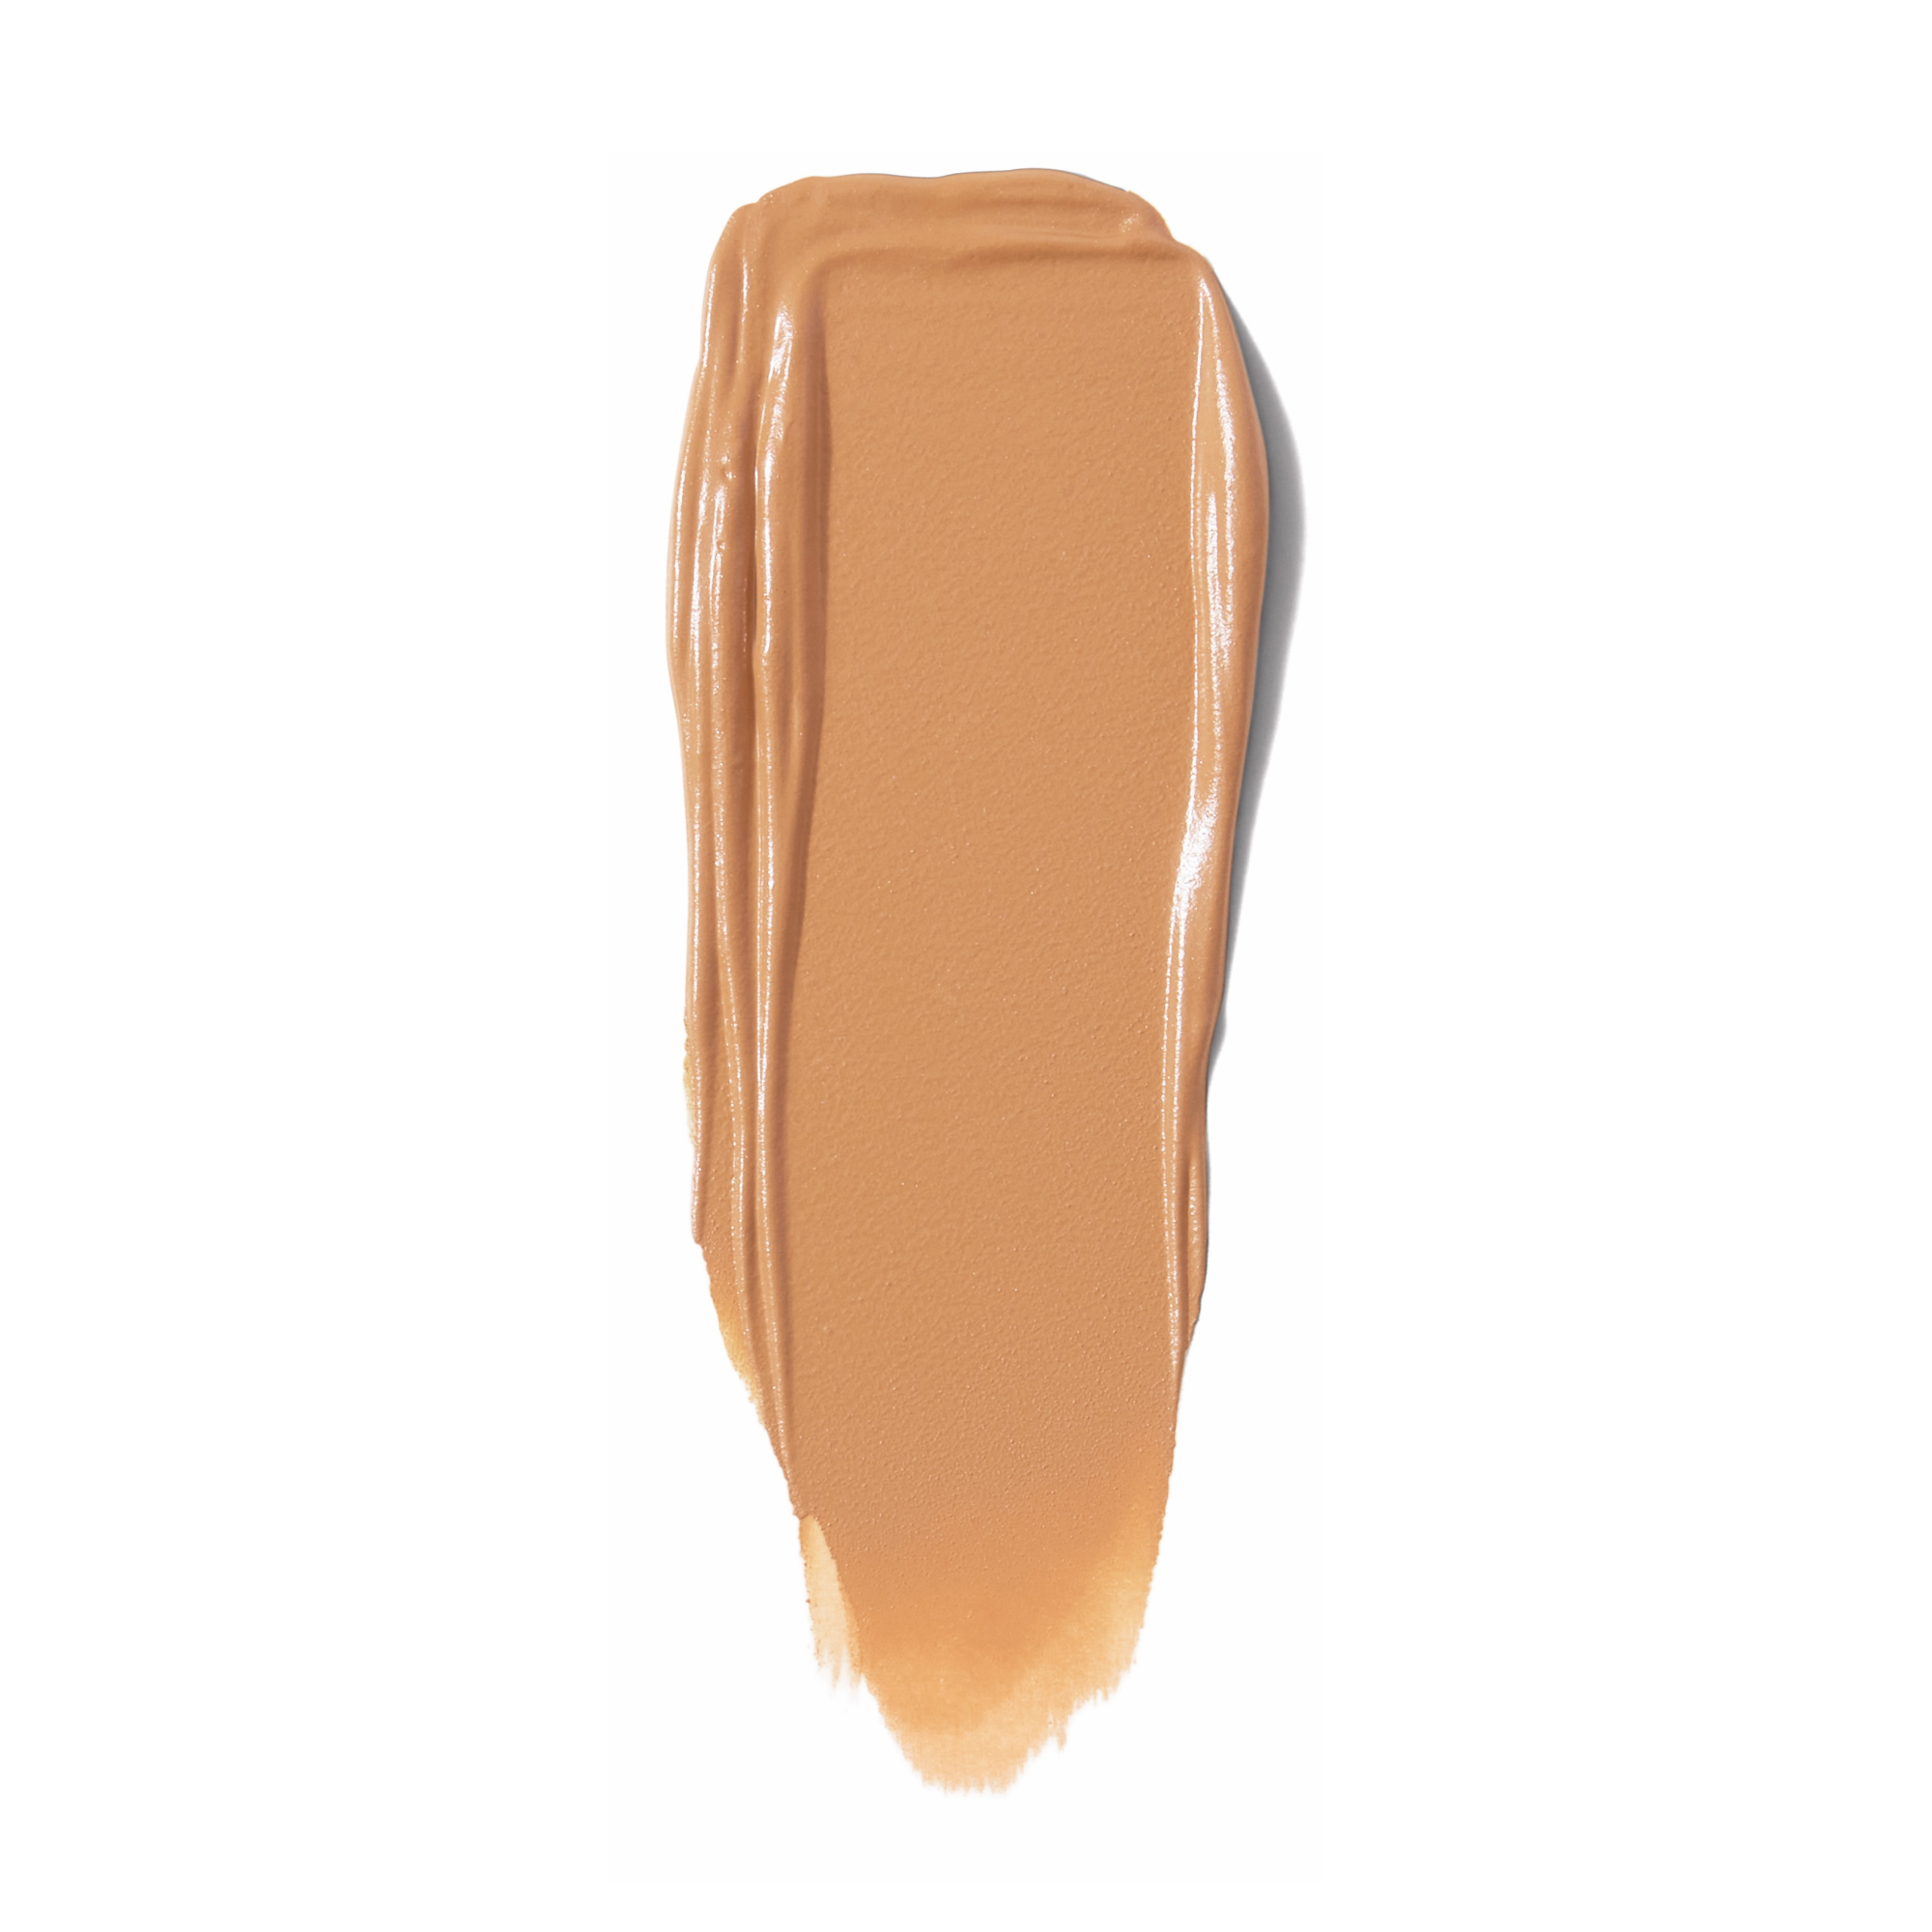 Benefit Cosmetics Boi-ing Bright On Concealer - In Apricot, Size: Full Size